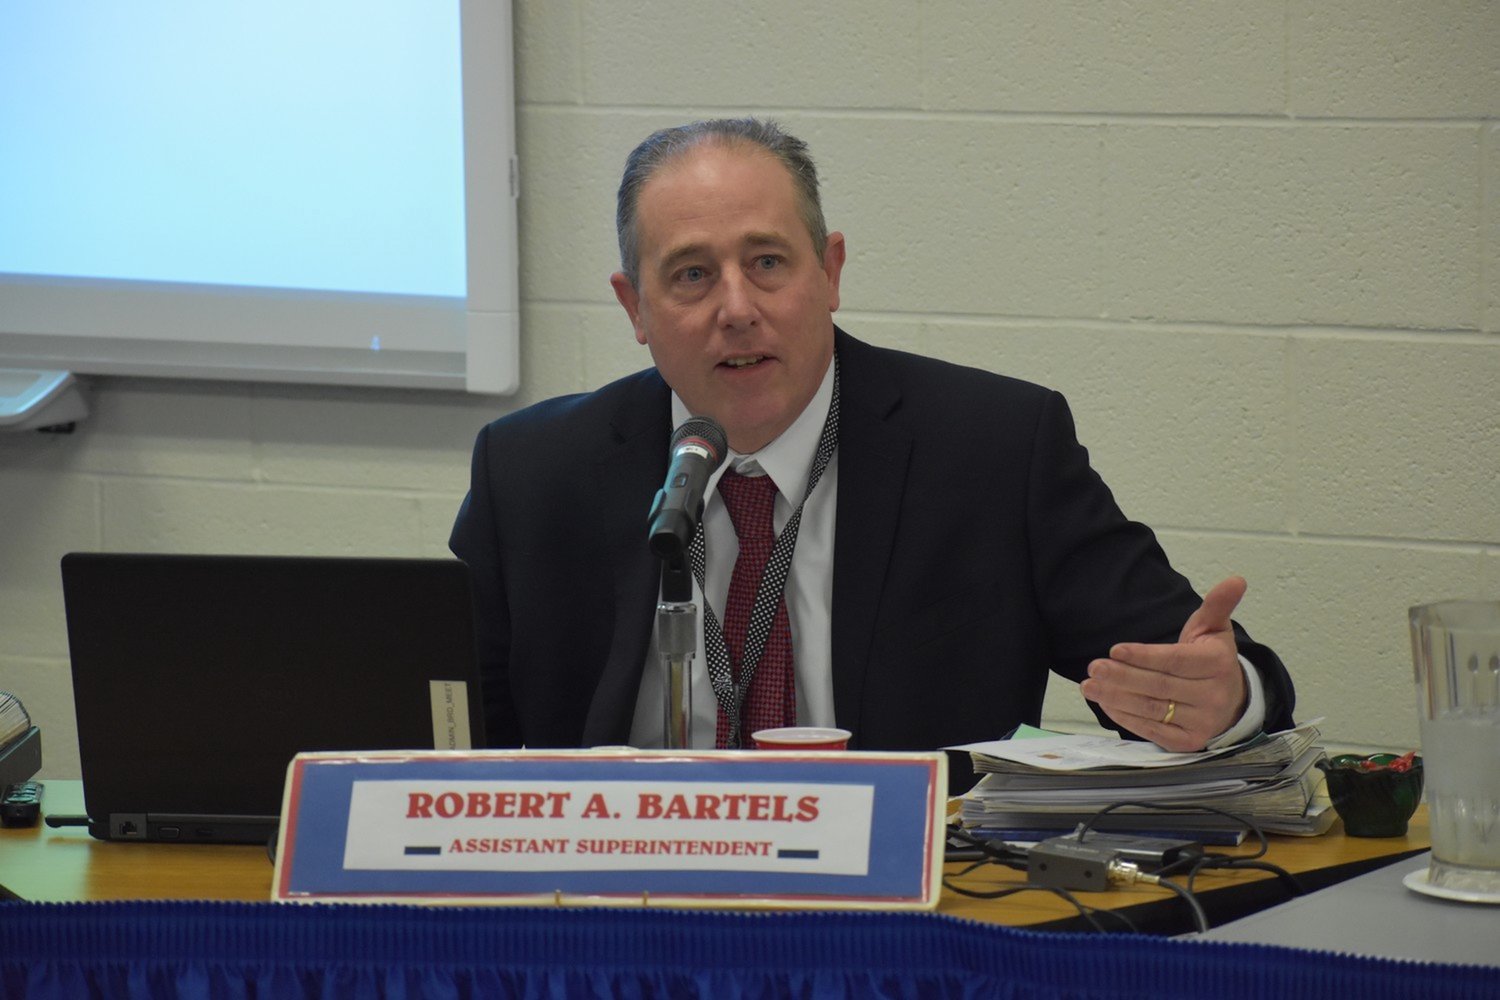 Many parents — vaccinated and non-vaccinated — have expressed outrage over interim Superintendent Robert Bartels’s announcement that audiences will be separated based on vaccination status at the district’s winter concerts next month.